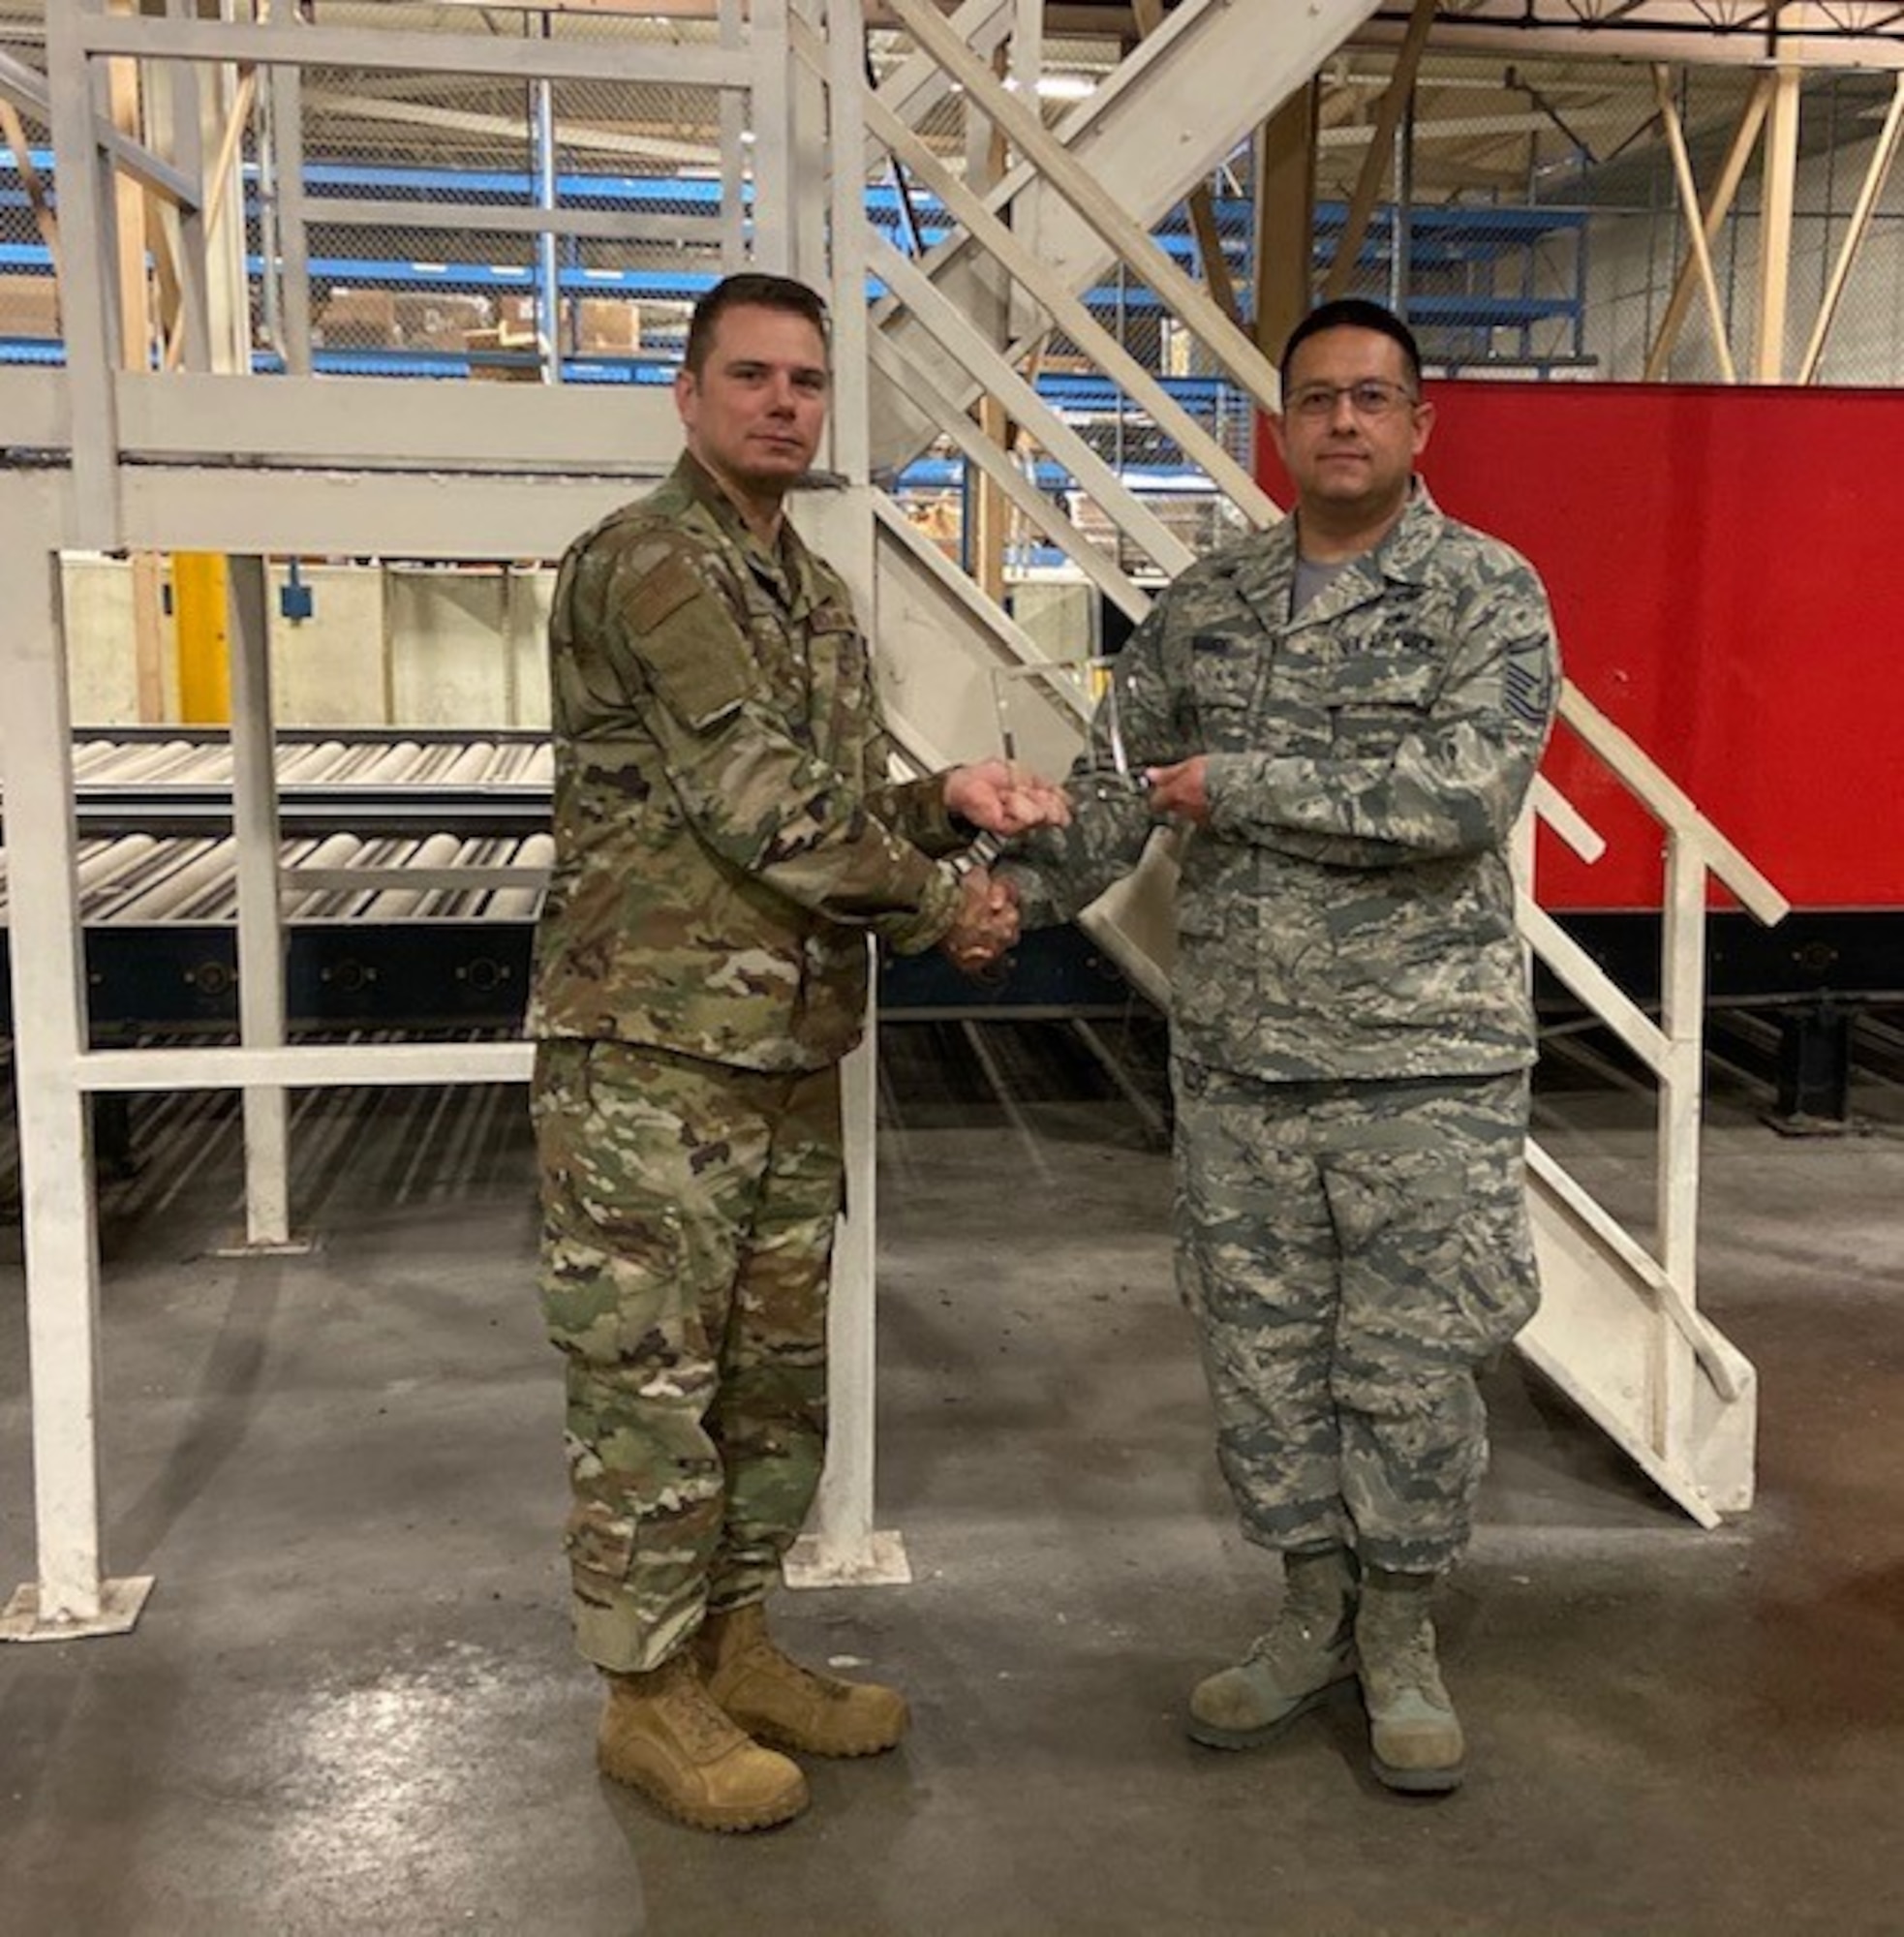 Master Sgt. Carlo Grande, 94th Aerial Port Squadron ramp services flight team chief, right, accepts the quarterly award for Senior NCO of the Quarter from Maj. James Fink, 94th APS commander at Robins Air Force Base, Ga.The award was presented on behalf of the wing commander and command chief. (Courtesy photo)